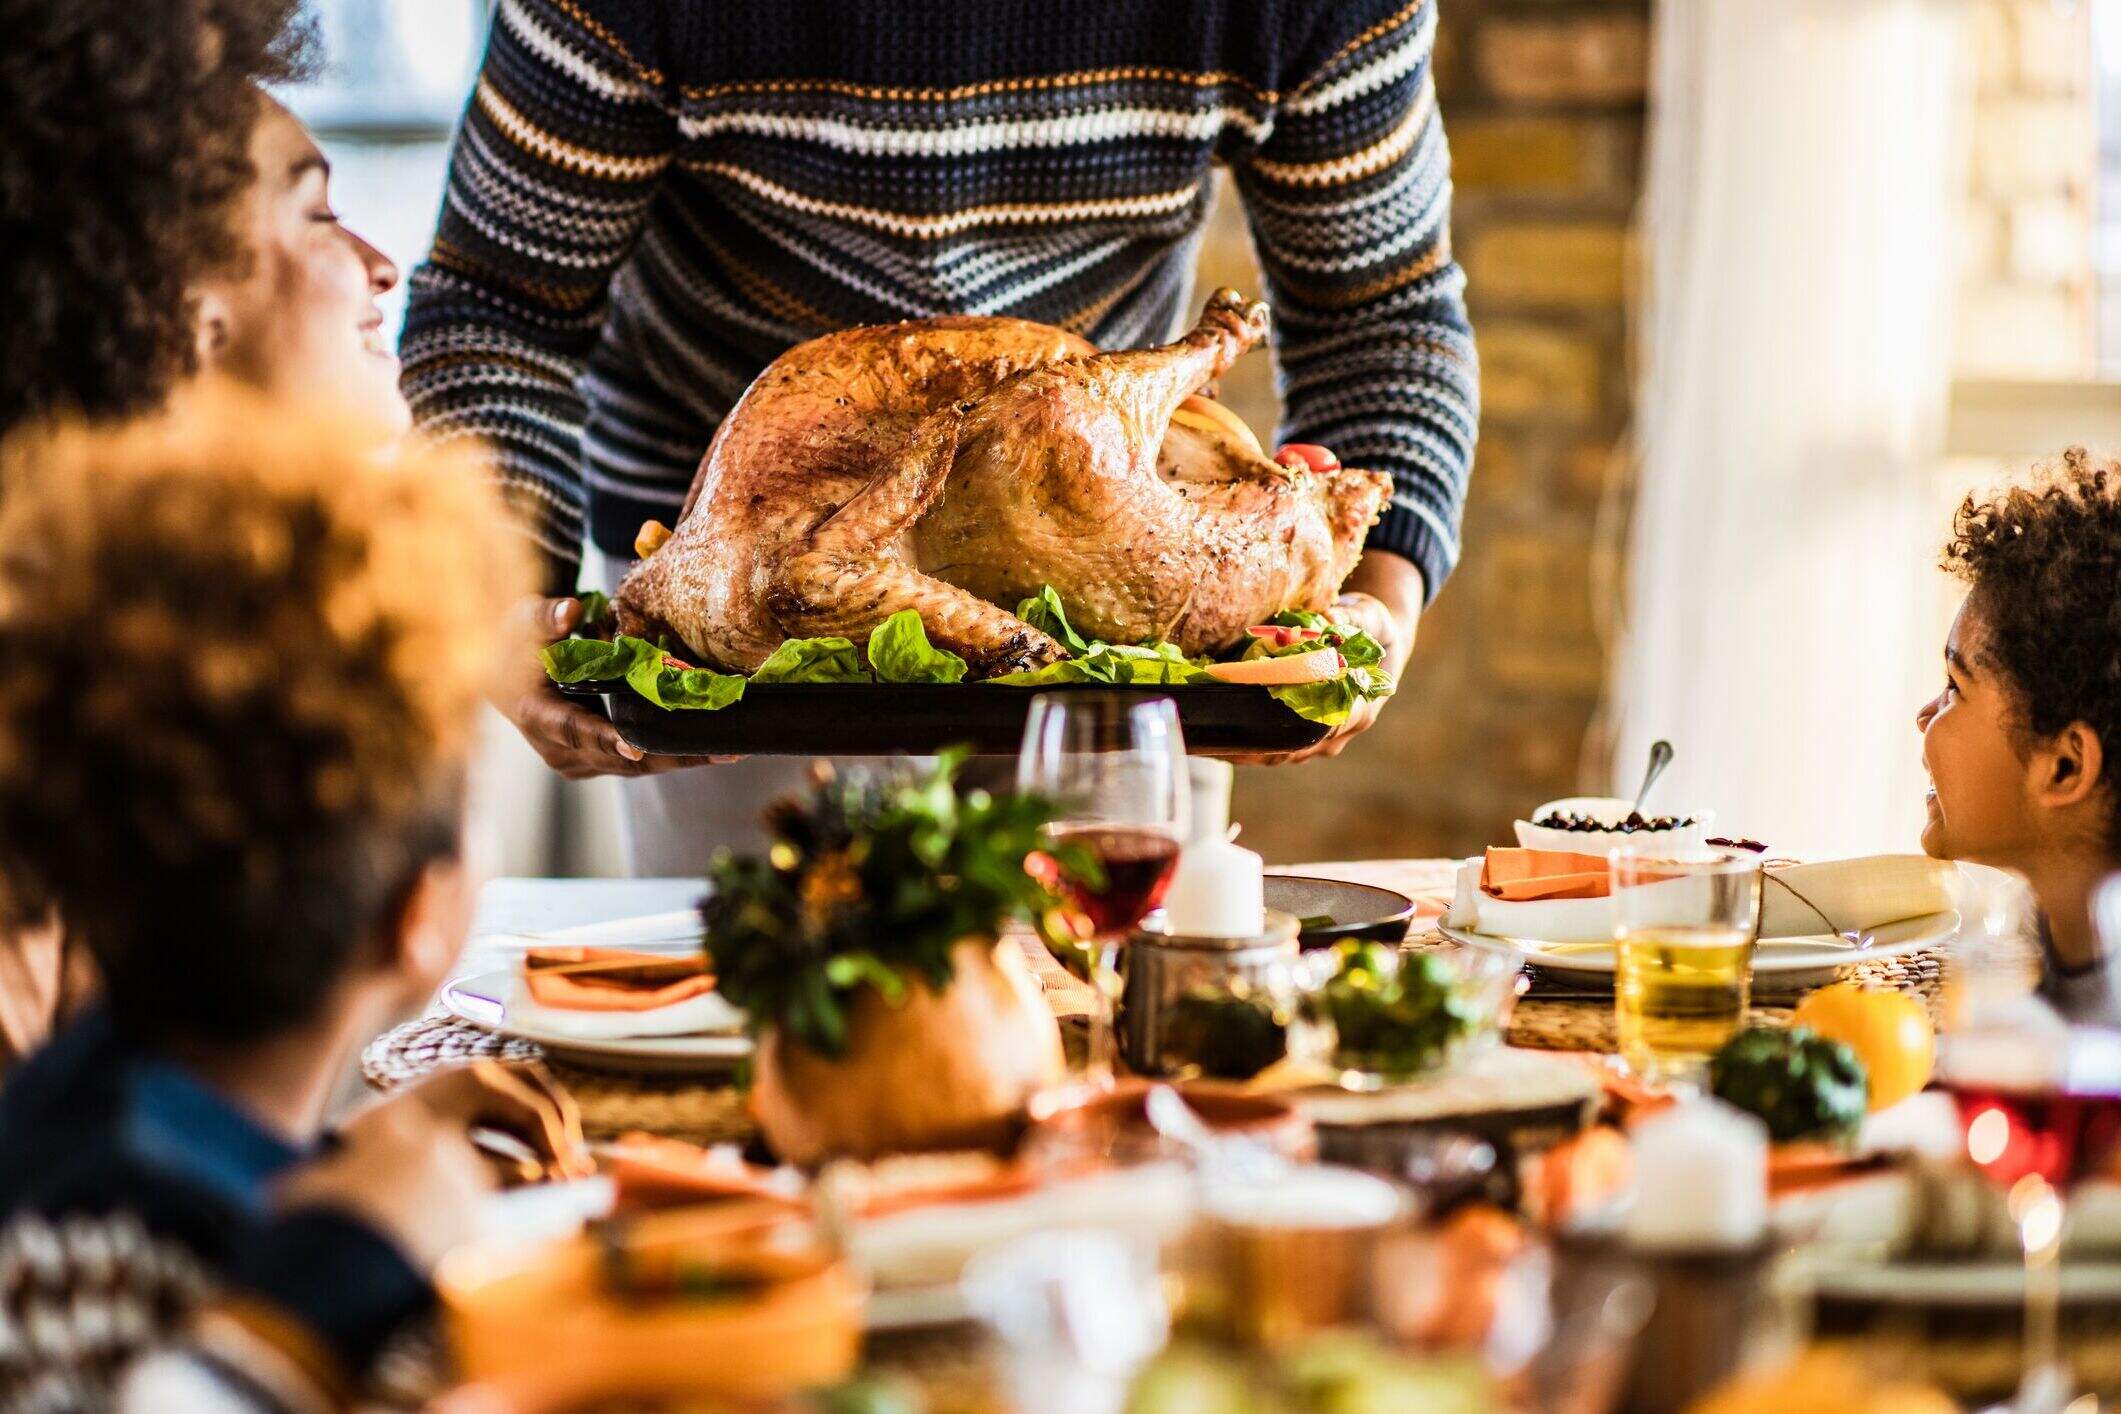 19 Best Fun Facts About Thanksgiving Food - Facts.net